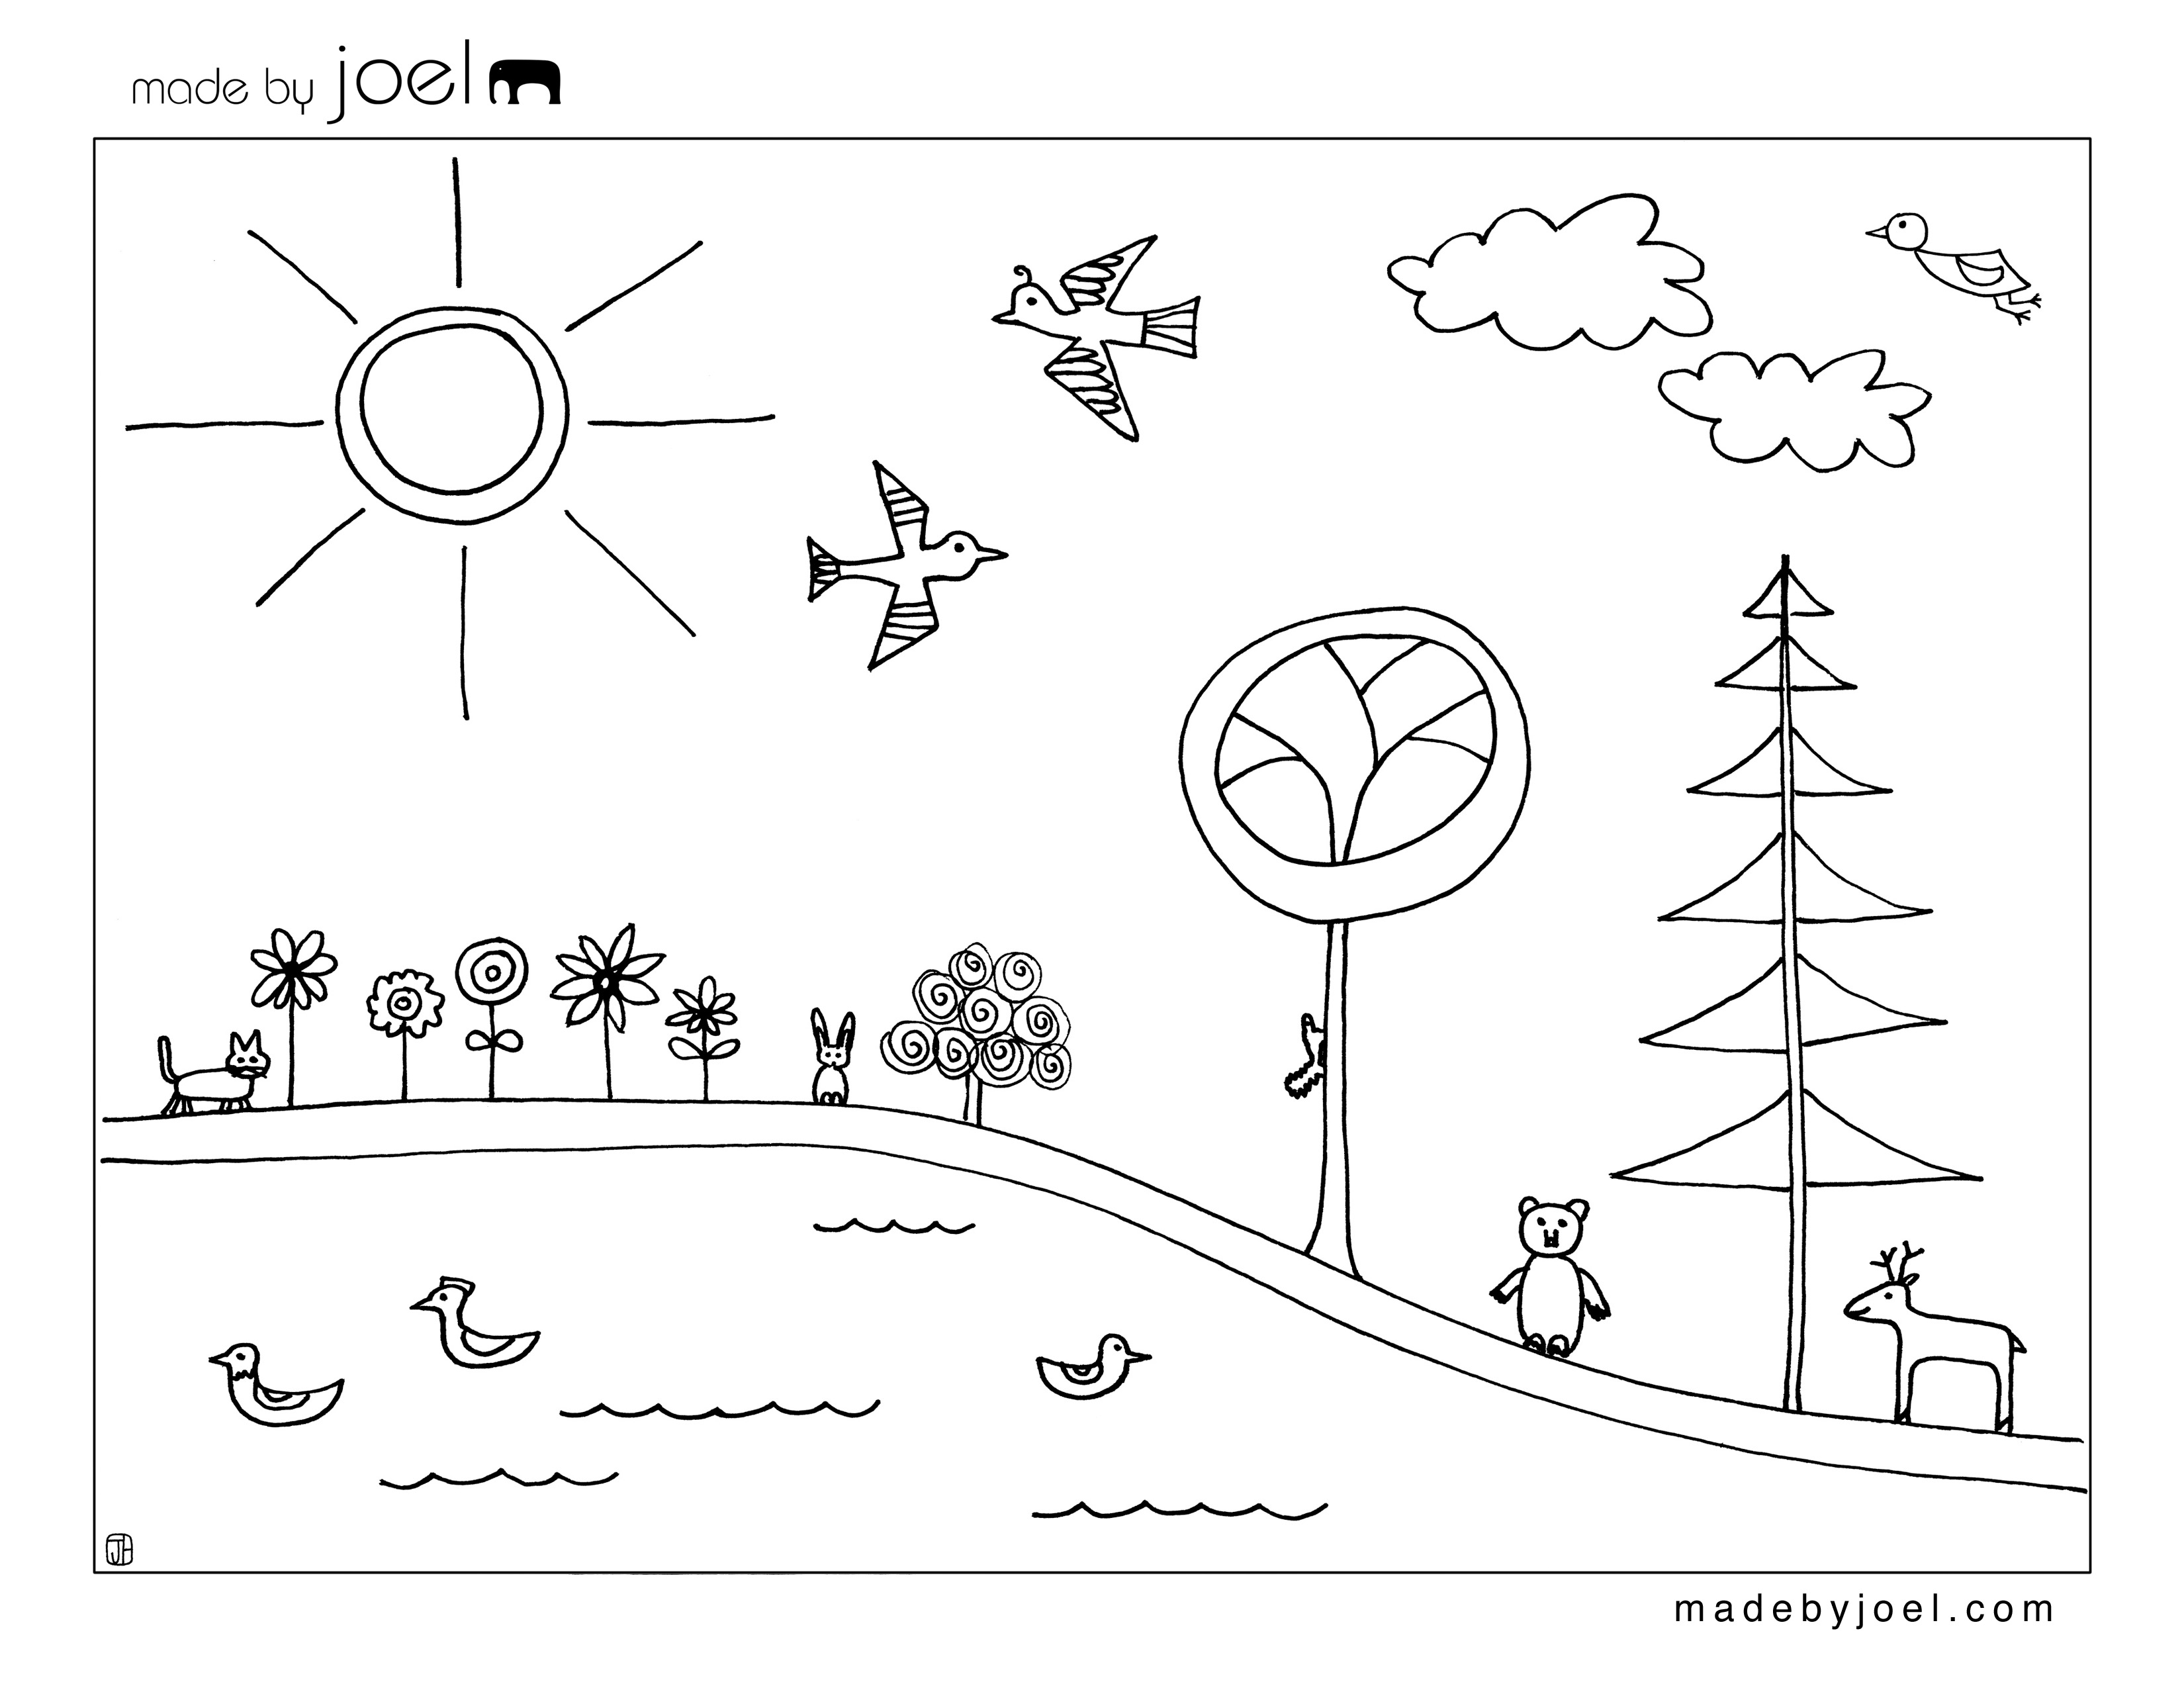 Earth Day Coloring Sheet – Made by Joel